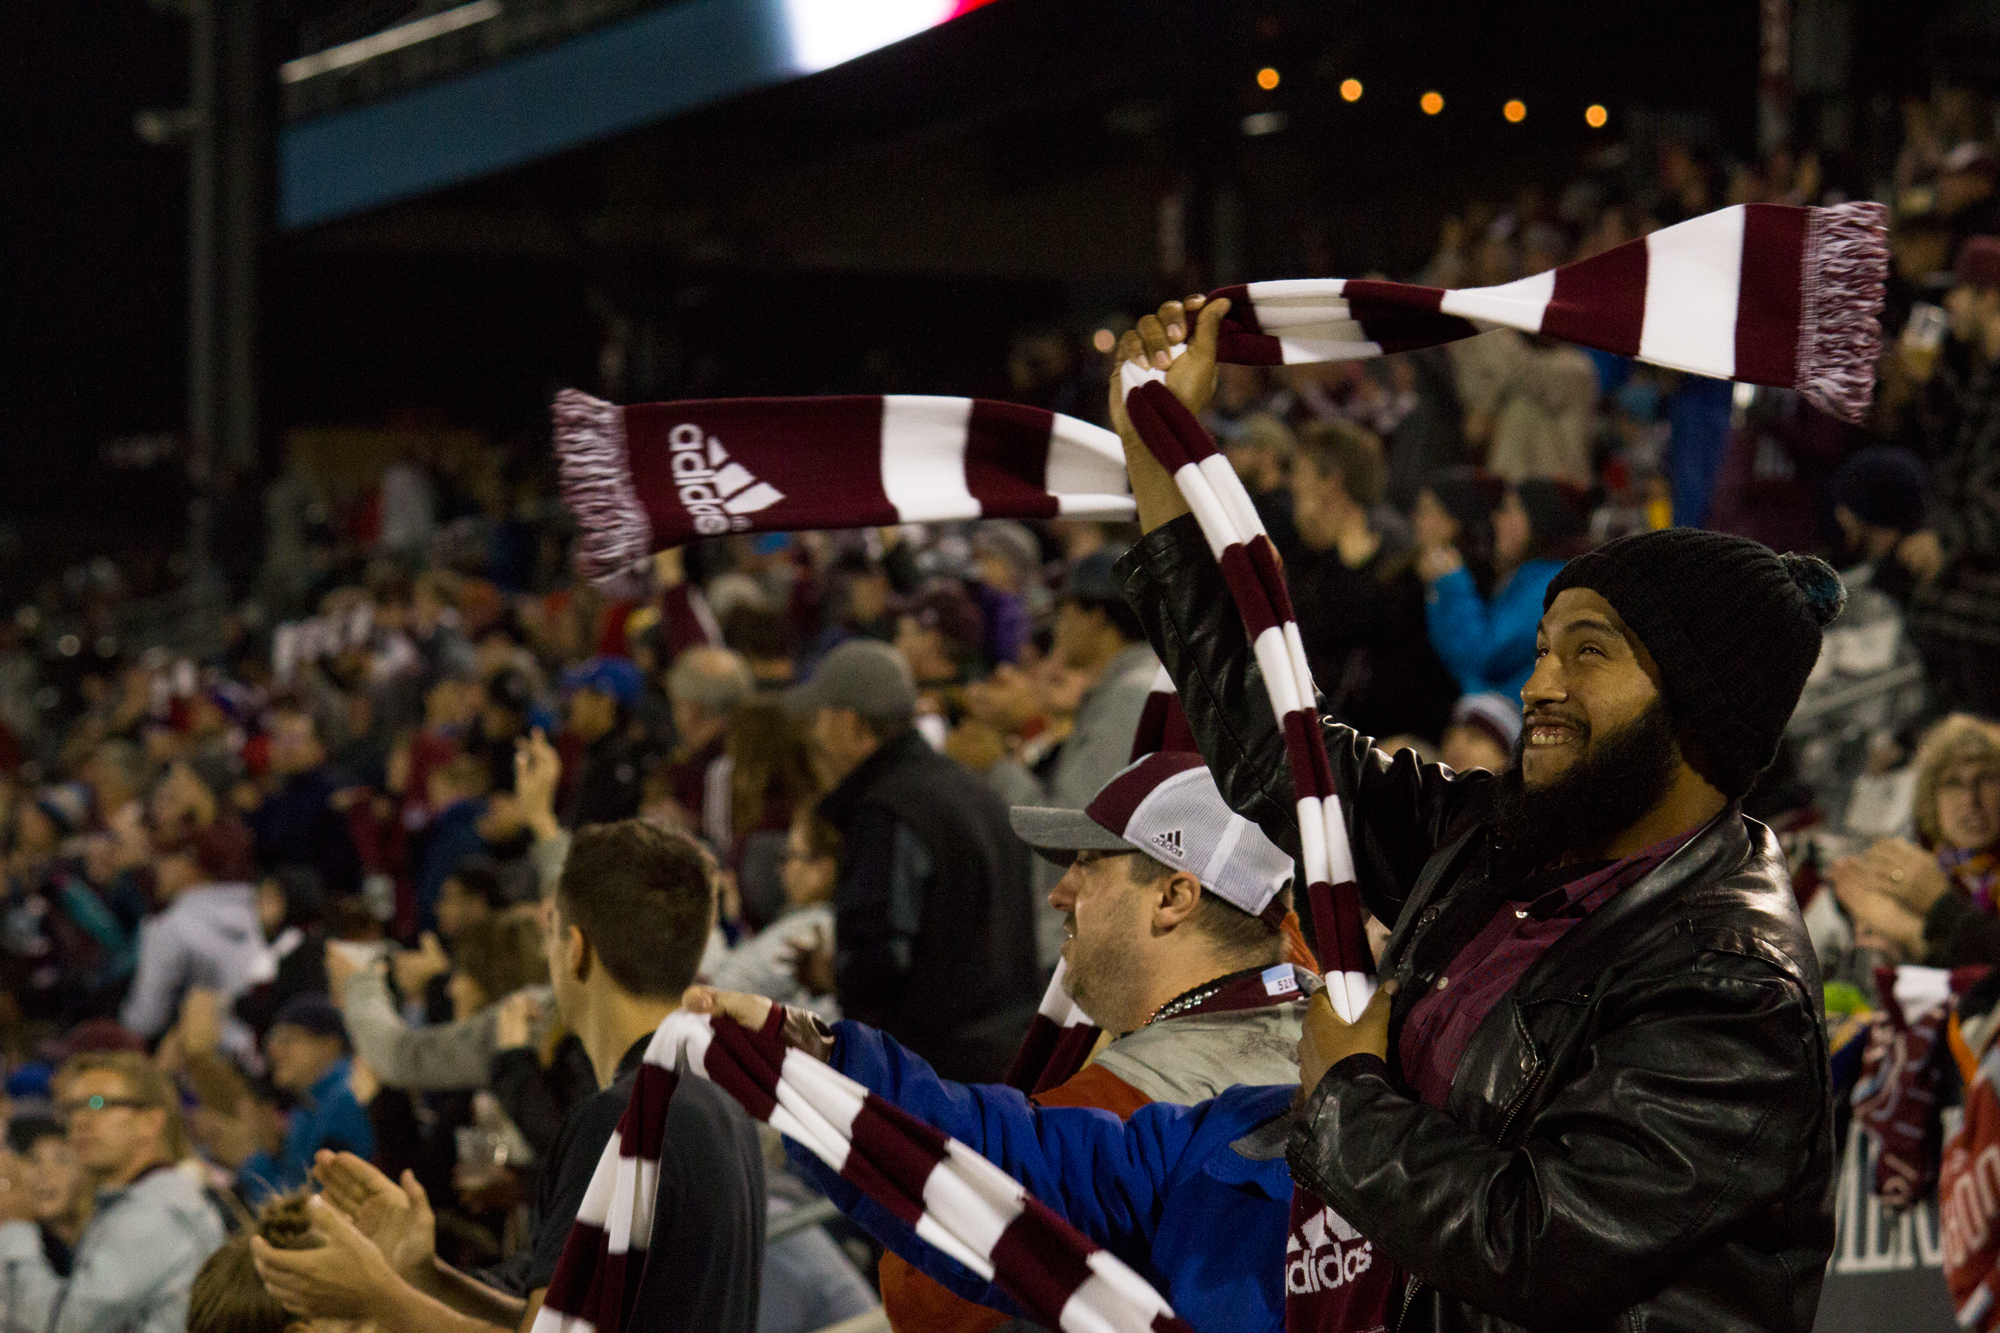 Attendees celebrate a goal in the second half at Dick's Sporting Goods Park. Photo by: Matthew McGuire